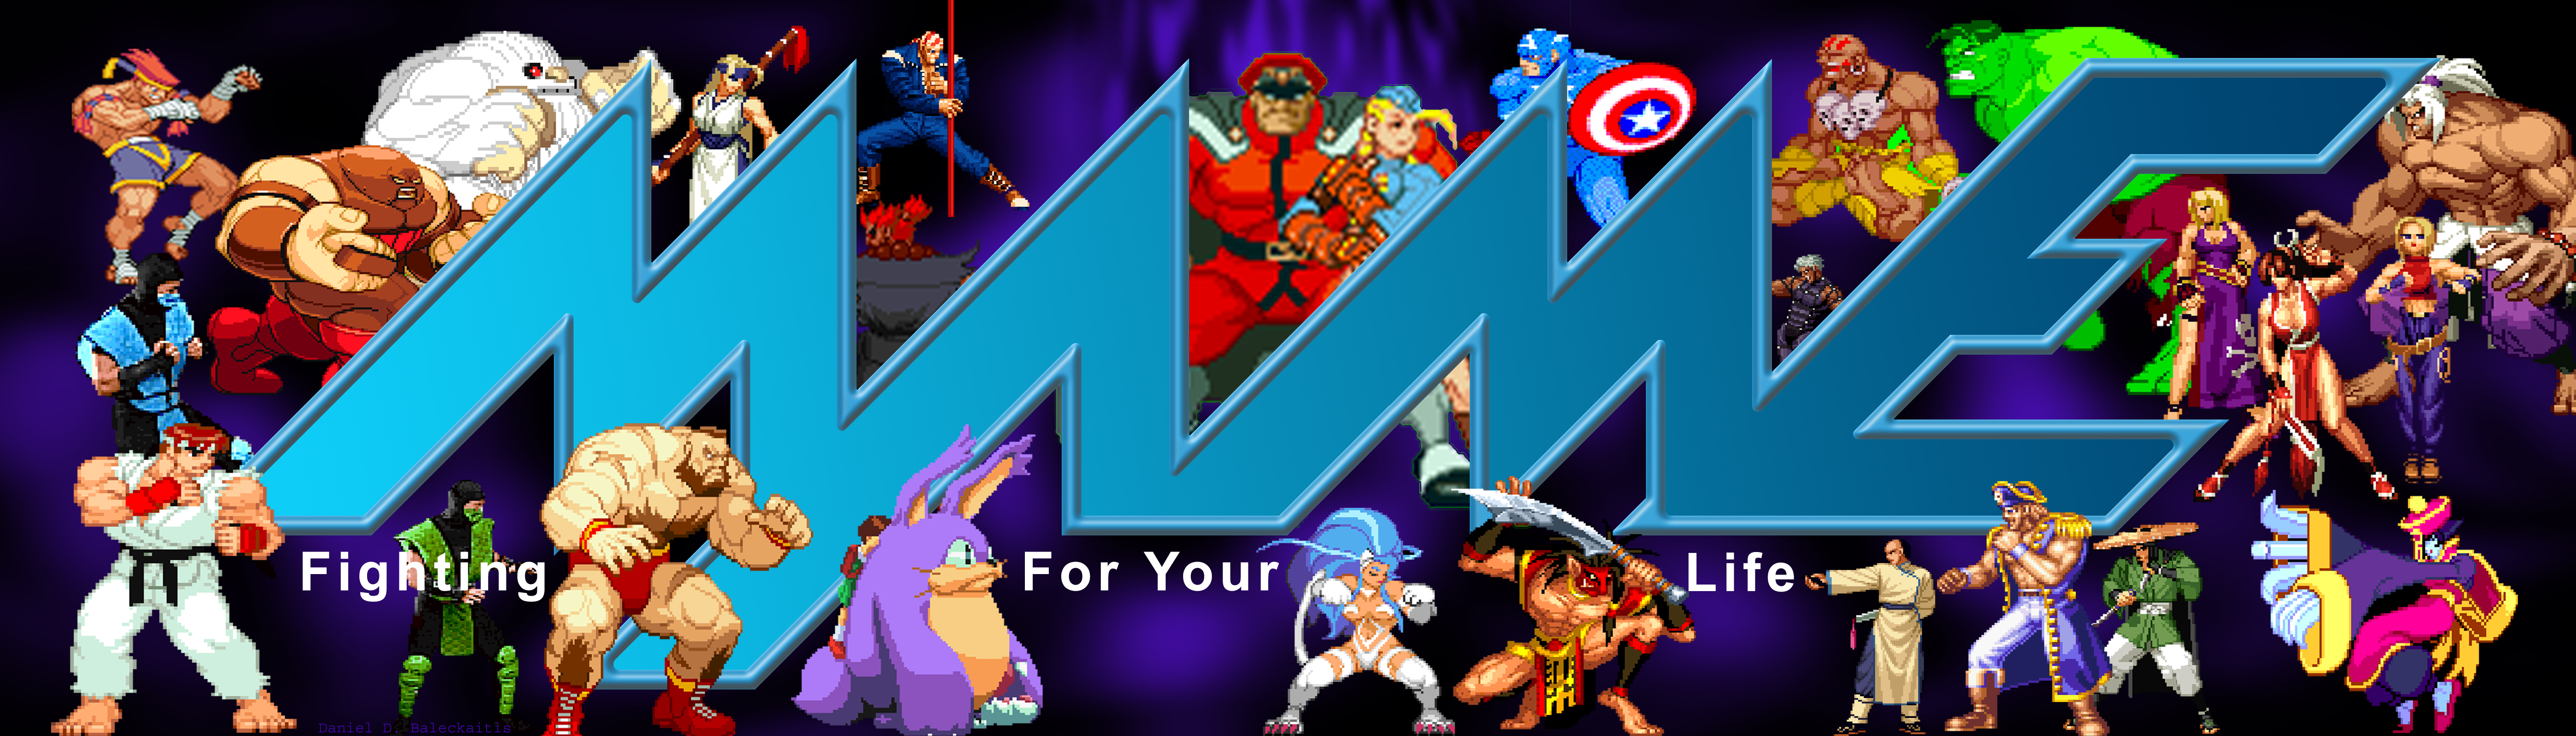 Mame Arcade Classics Marquee For Reproduction Header/Backlit Sign 